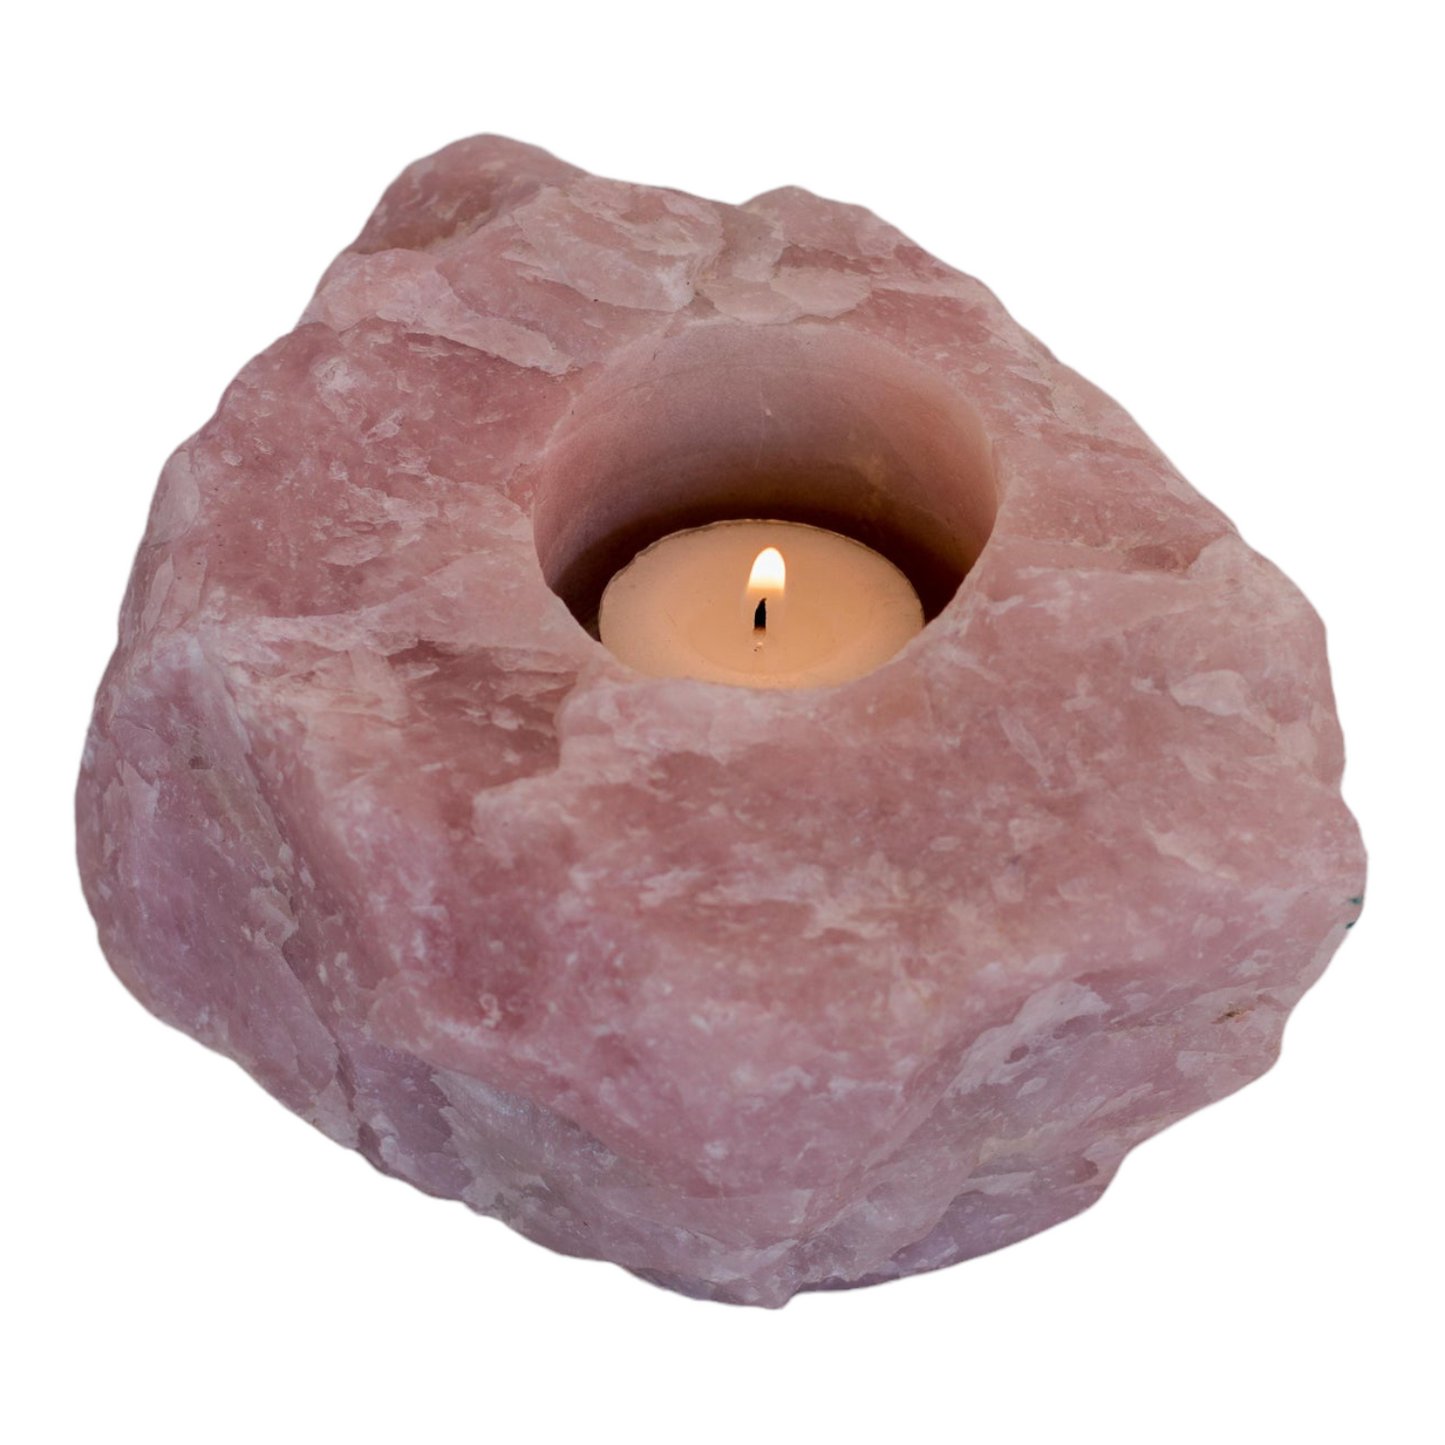 Rose Quartz Candle Holder - EARLY BIRD SPECIAL April 2022 - Crystal Geological